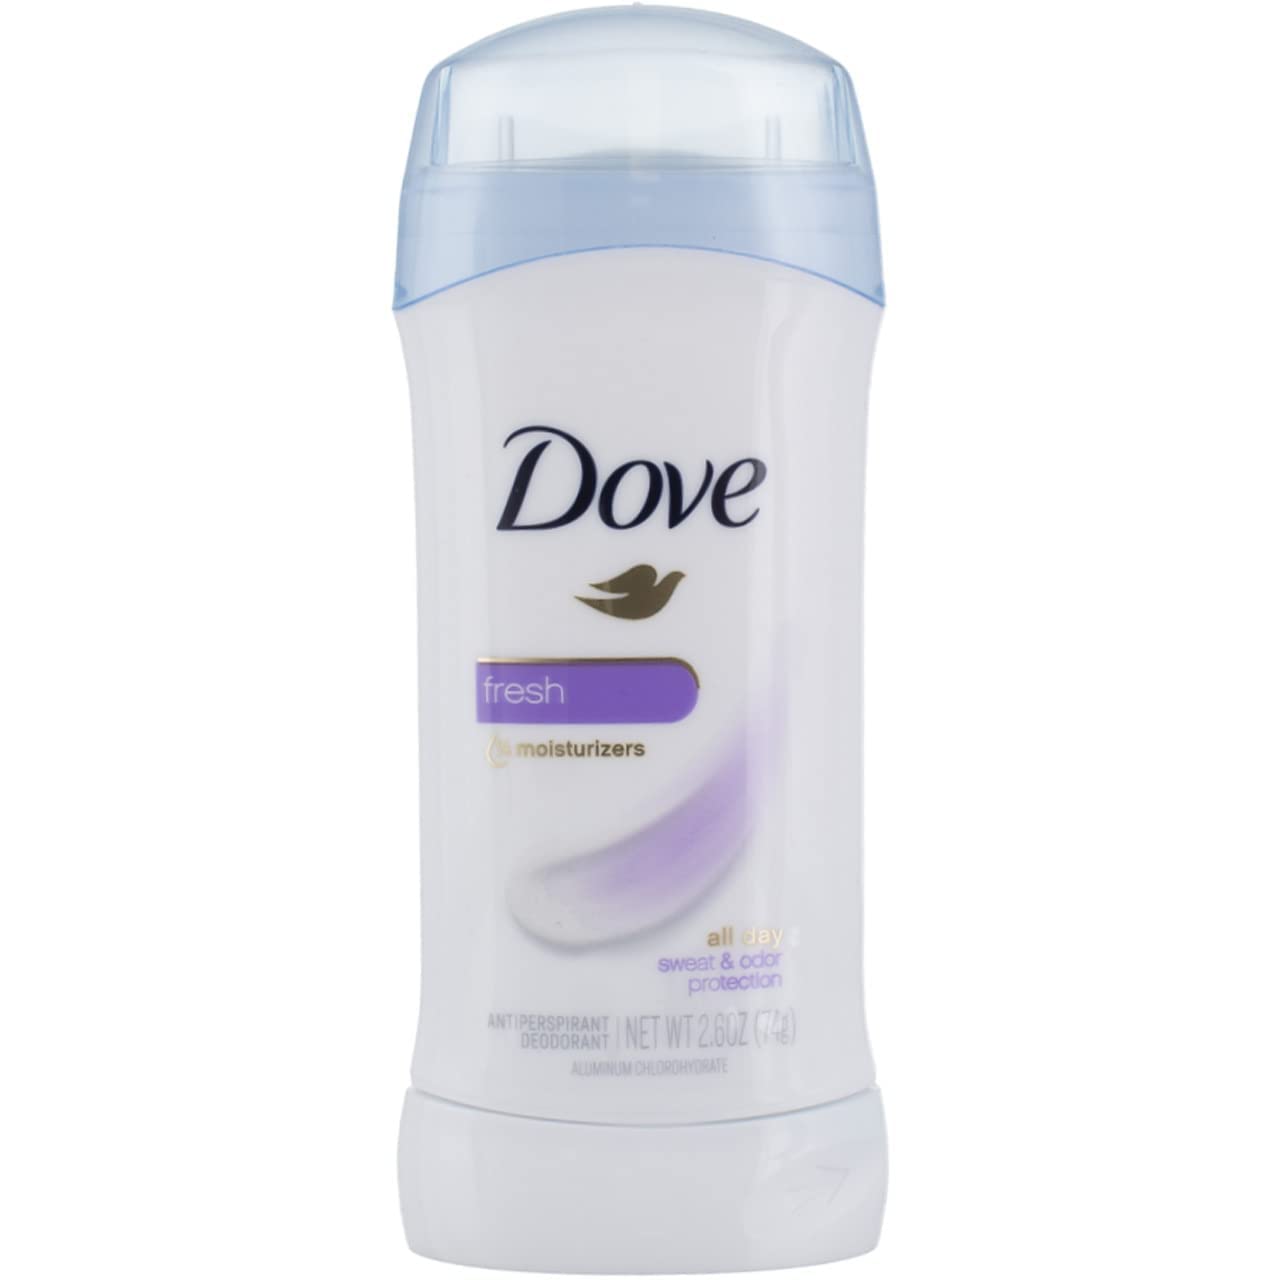 Dove Invisible Solid Deodorant, Fresh, 2.6 Ounce (Pack of 3)